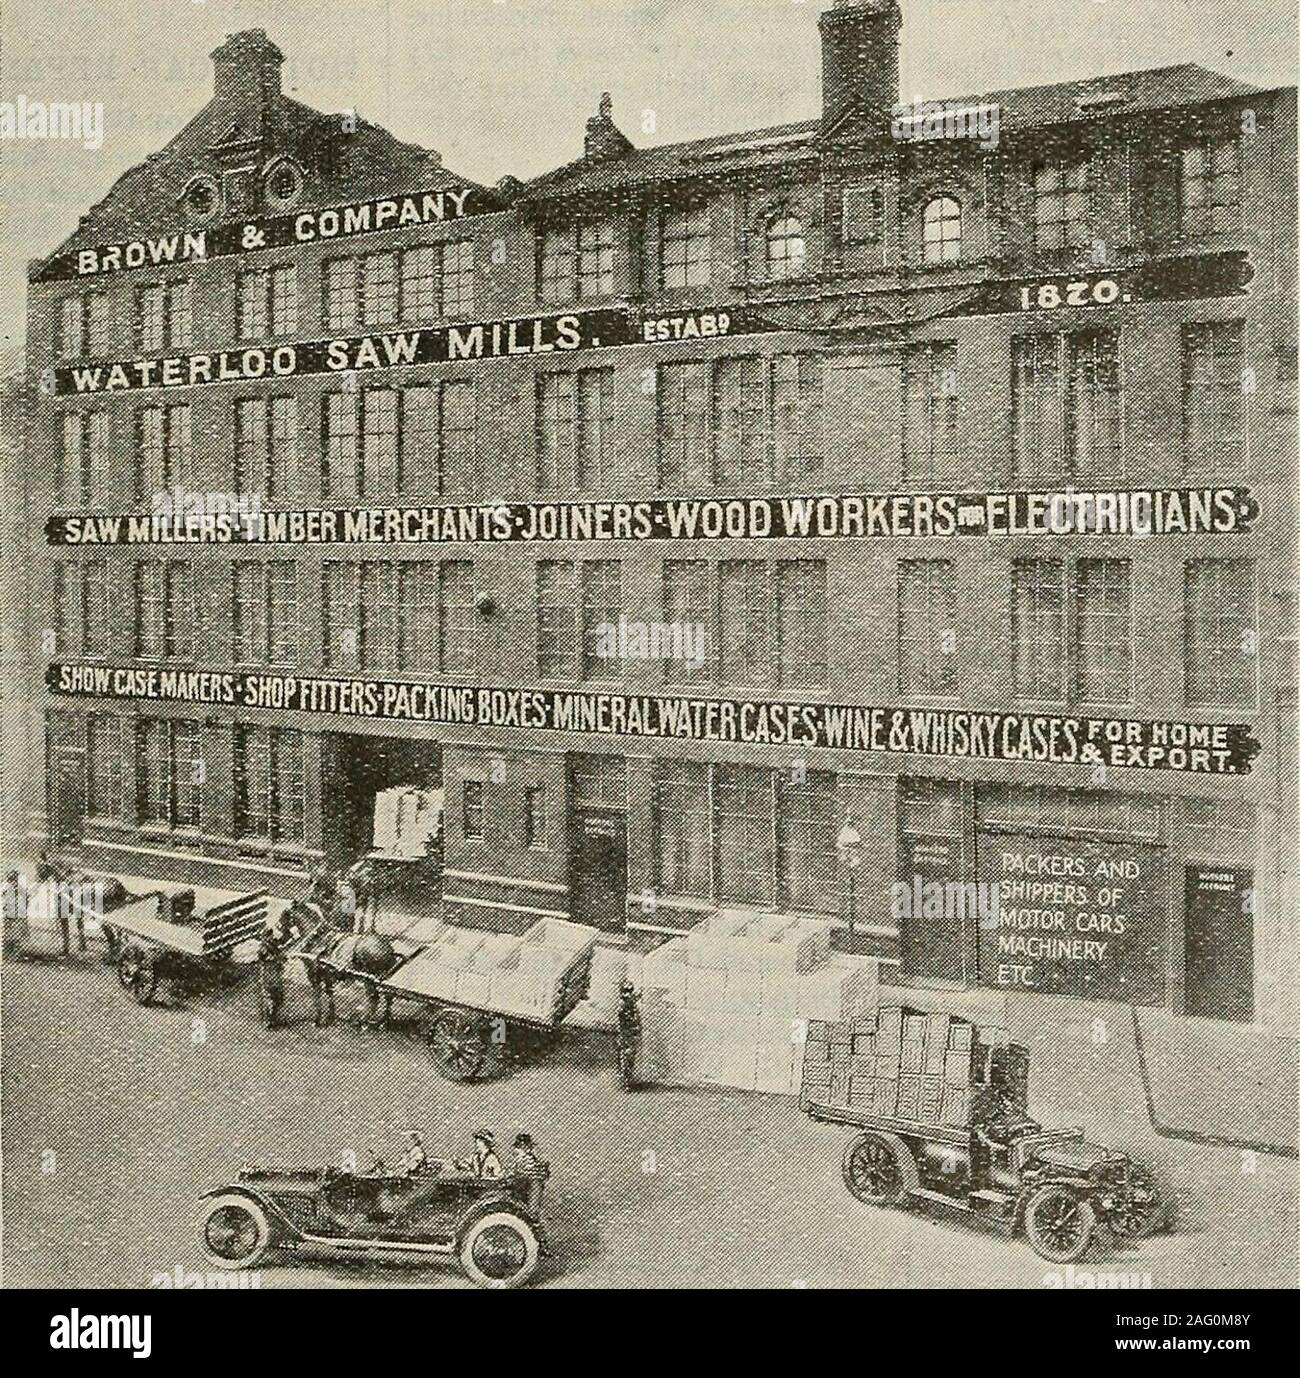 . The Post-Office annual Glasgow directory. 73 to 85 MALPINE ST., Anderston Cross, Phone Nos. 6566 Central (3 lines). GLASGOW. Telegrams: BOXES, GLASGOW. Motor Car Packing Department Entrance 31-33 WASHINGTON STREET (OPEN DAY AND NIGHT). ON ADMIRALTY, WAR OFFICE, AND POST OFFICE LISTS. MOTOR 1412 TRADES MOTOR CAR COMPONENTS. Projectile and Engineering Co.,Ltd. (axle and torque tubes,Chassis frames, pressings, &c);agents, John Hollis & Co., 14St. Vincent place The Redheugh Iron & Steel Co.,Ltd., Gateshead-on-Tyne (gearcutting, crank shaft grinding).Glasgow repres., David Giltnour,252 W. George Stock Photo